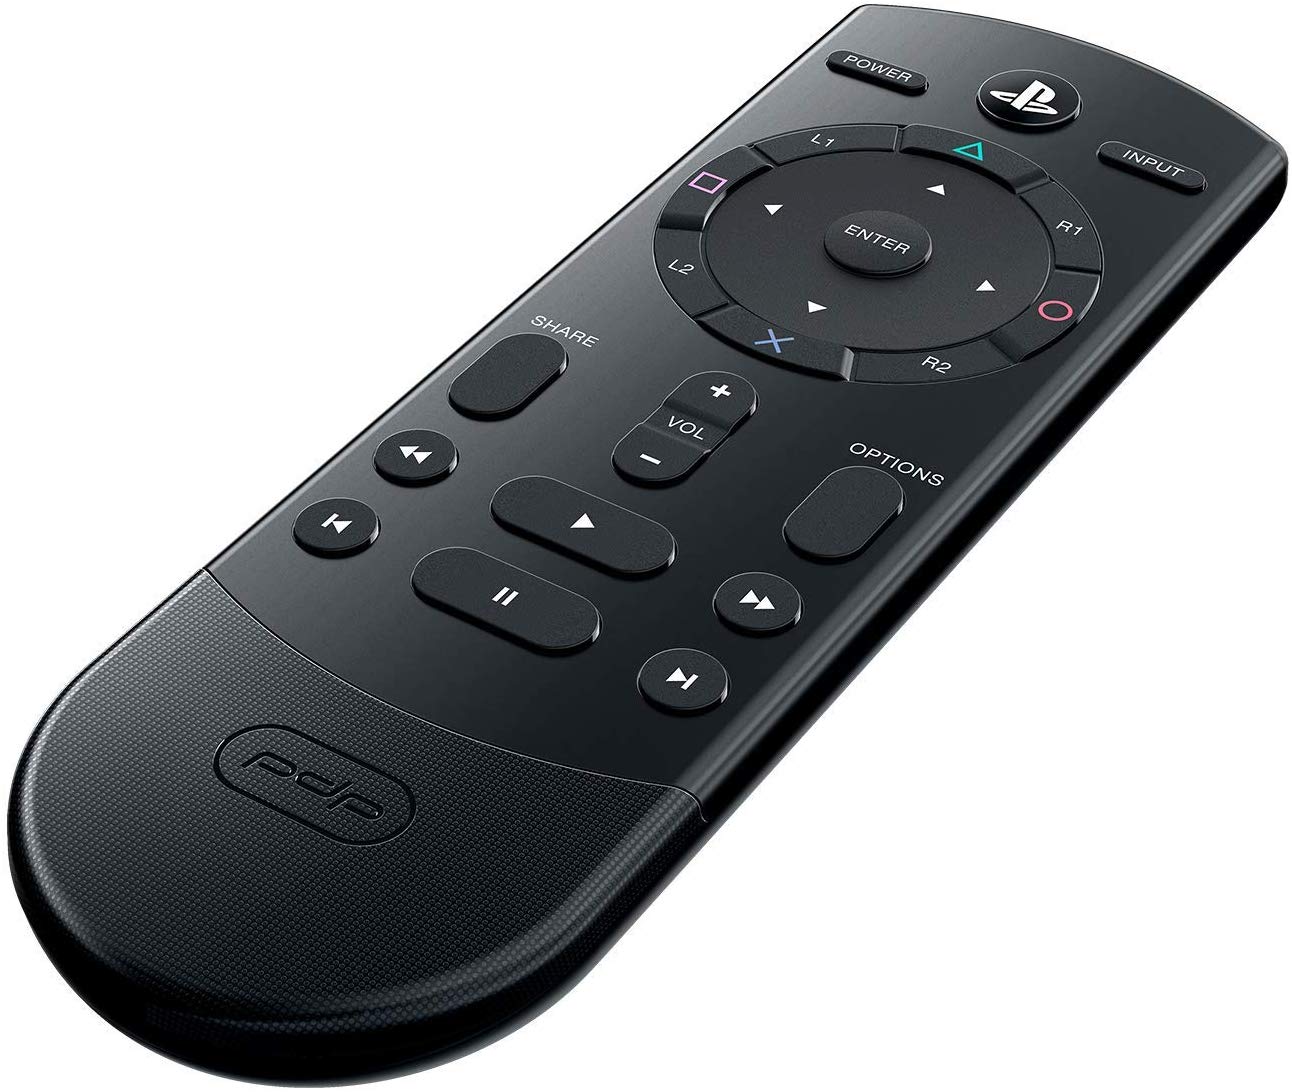 Review: Sony’s New PS4 Remote For PlayStation Vue (Comes With a 30-Day Free Trial of PS Vue)